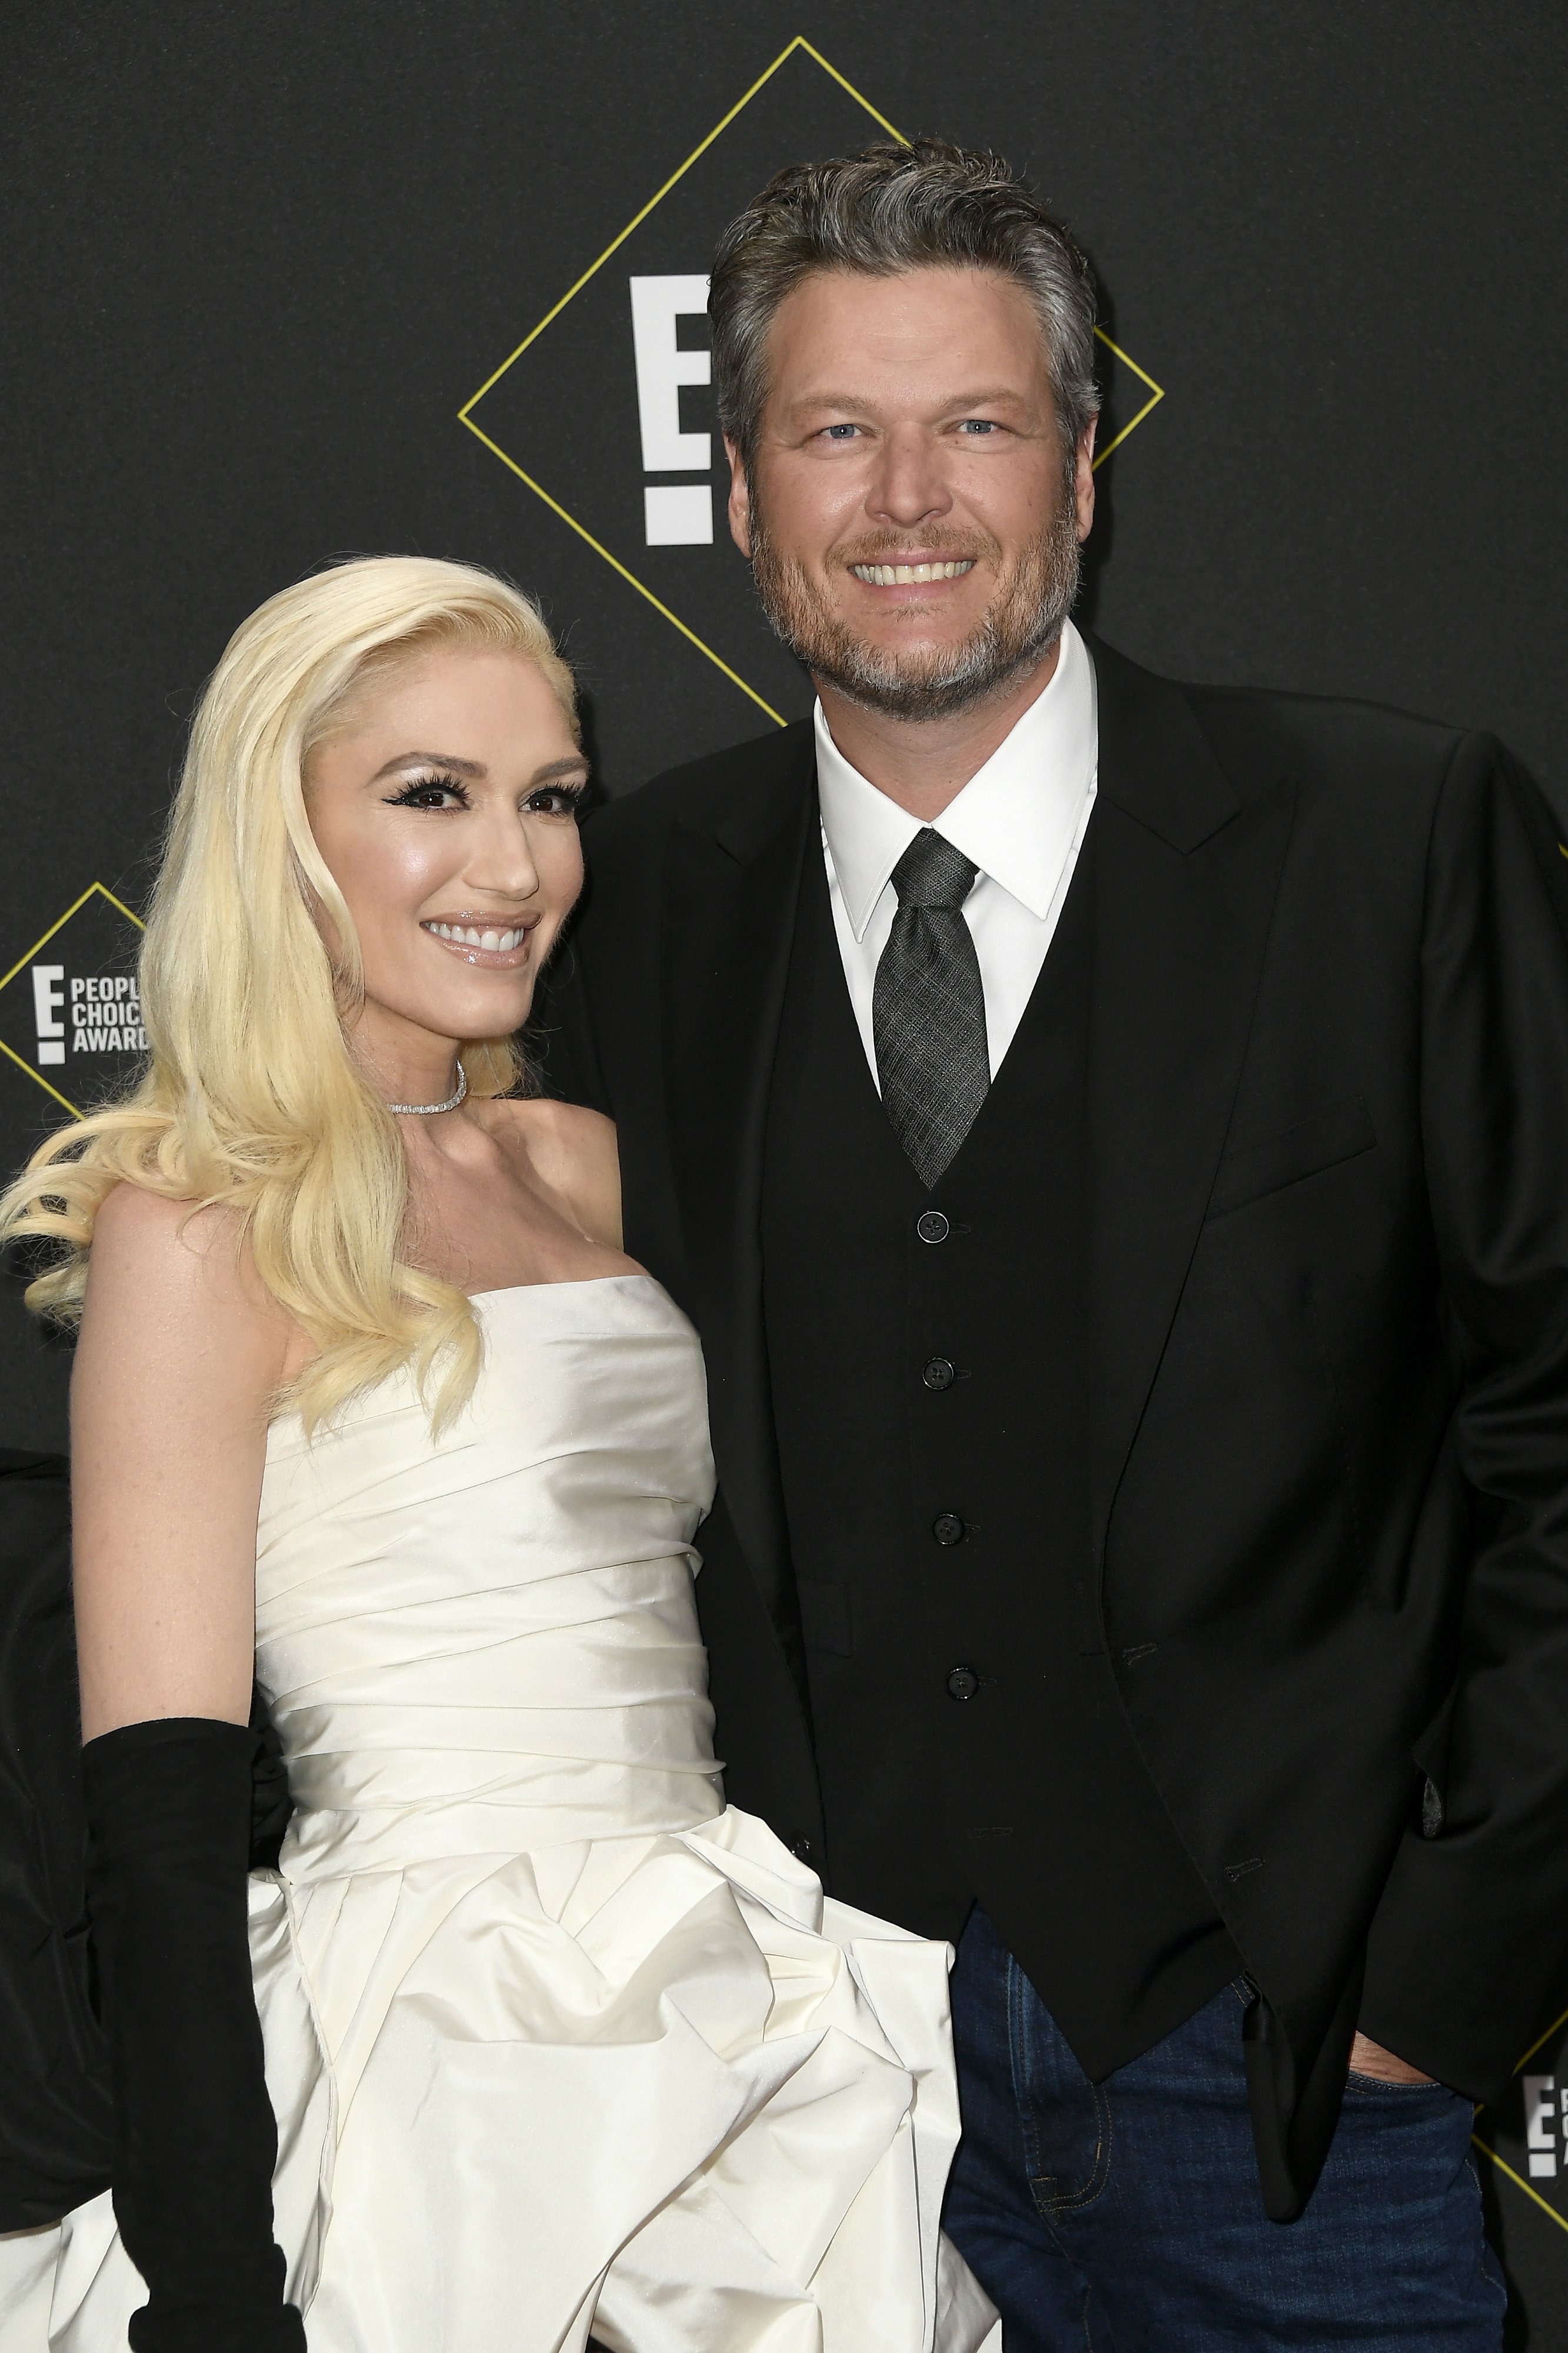 Gwen Stefani and Blake Shelton attend the 2019 E! People's Choice Awards at Barker Hangar on November 10, 2019, in Santa Monica, California. | Photo: Getty Images.